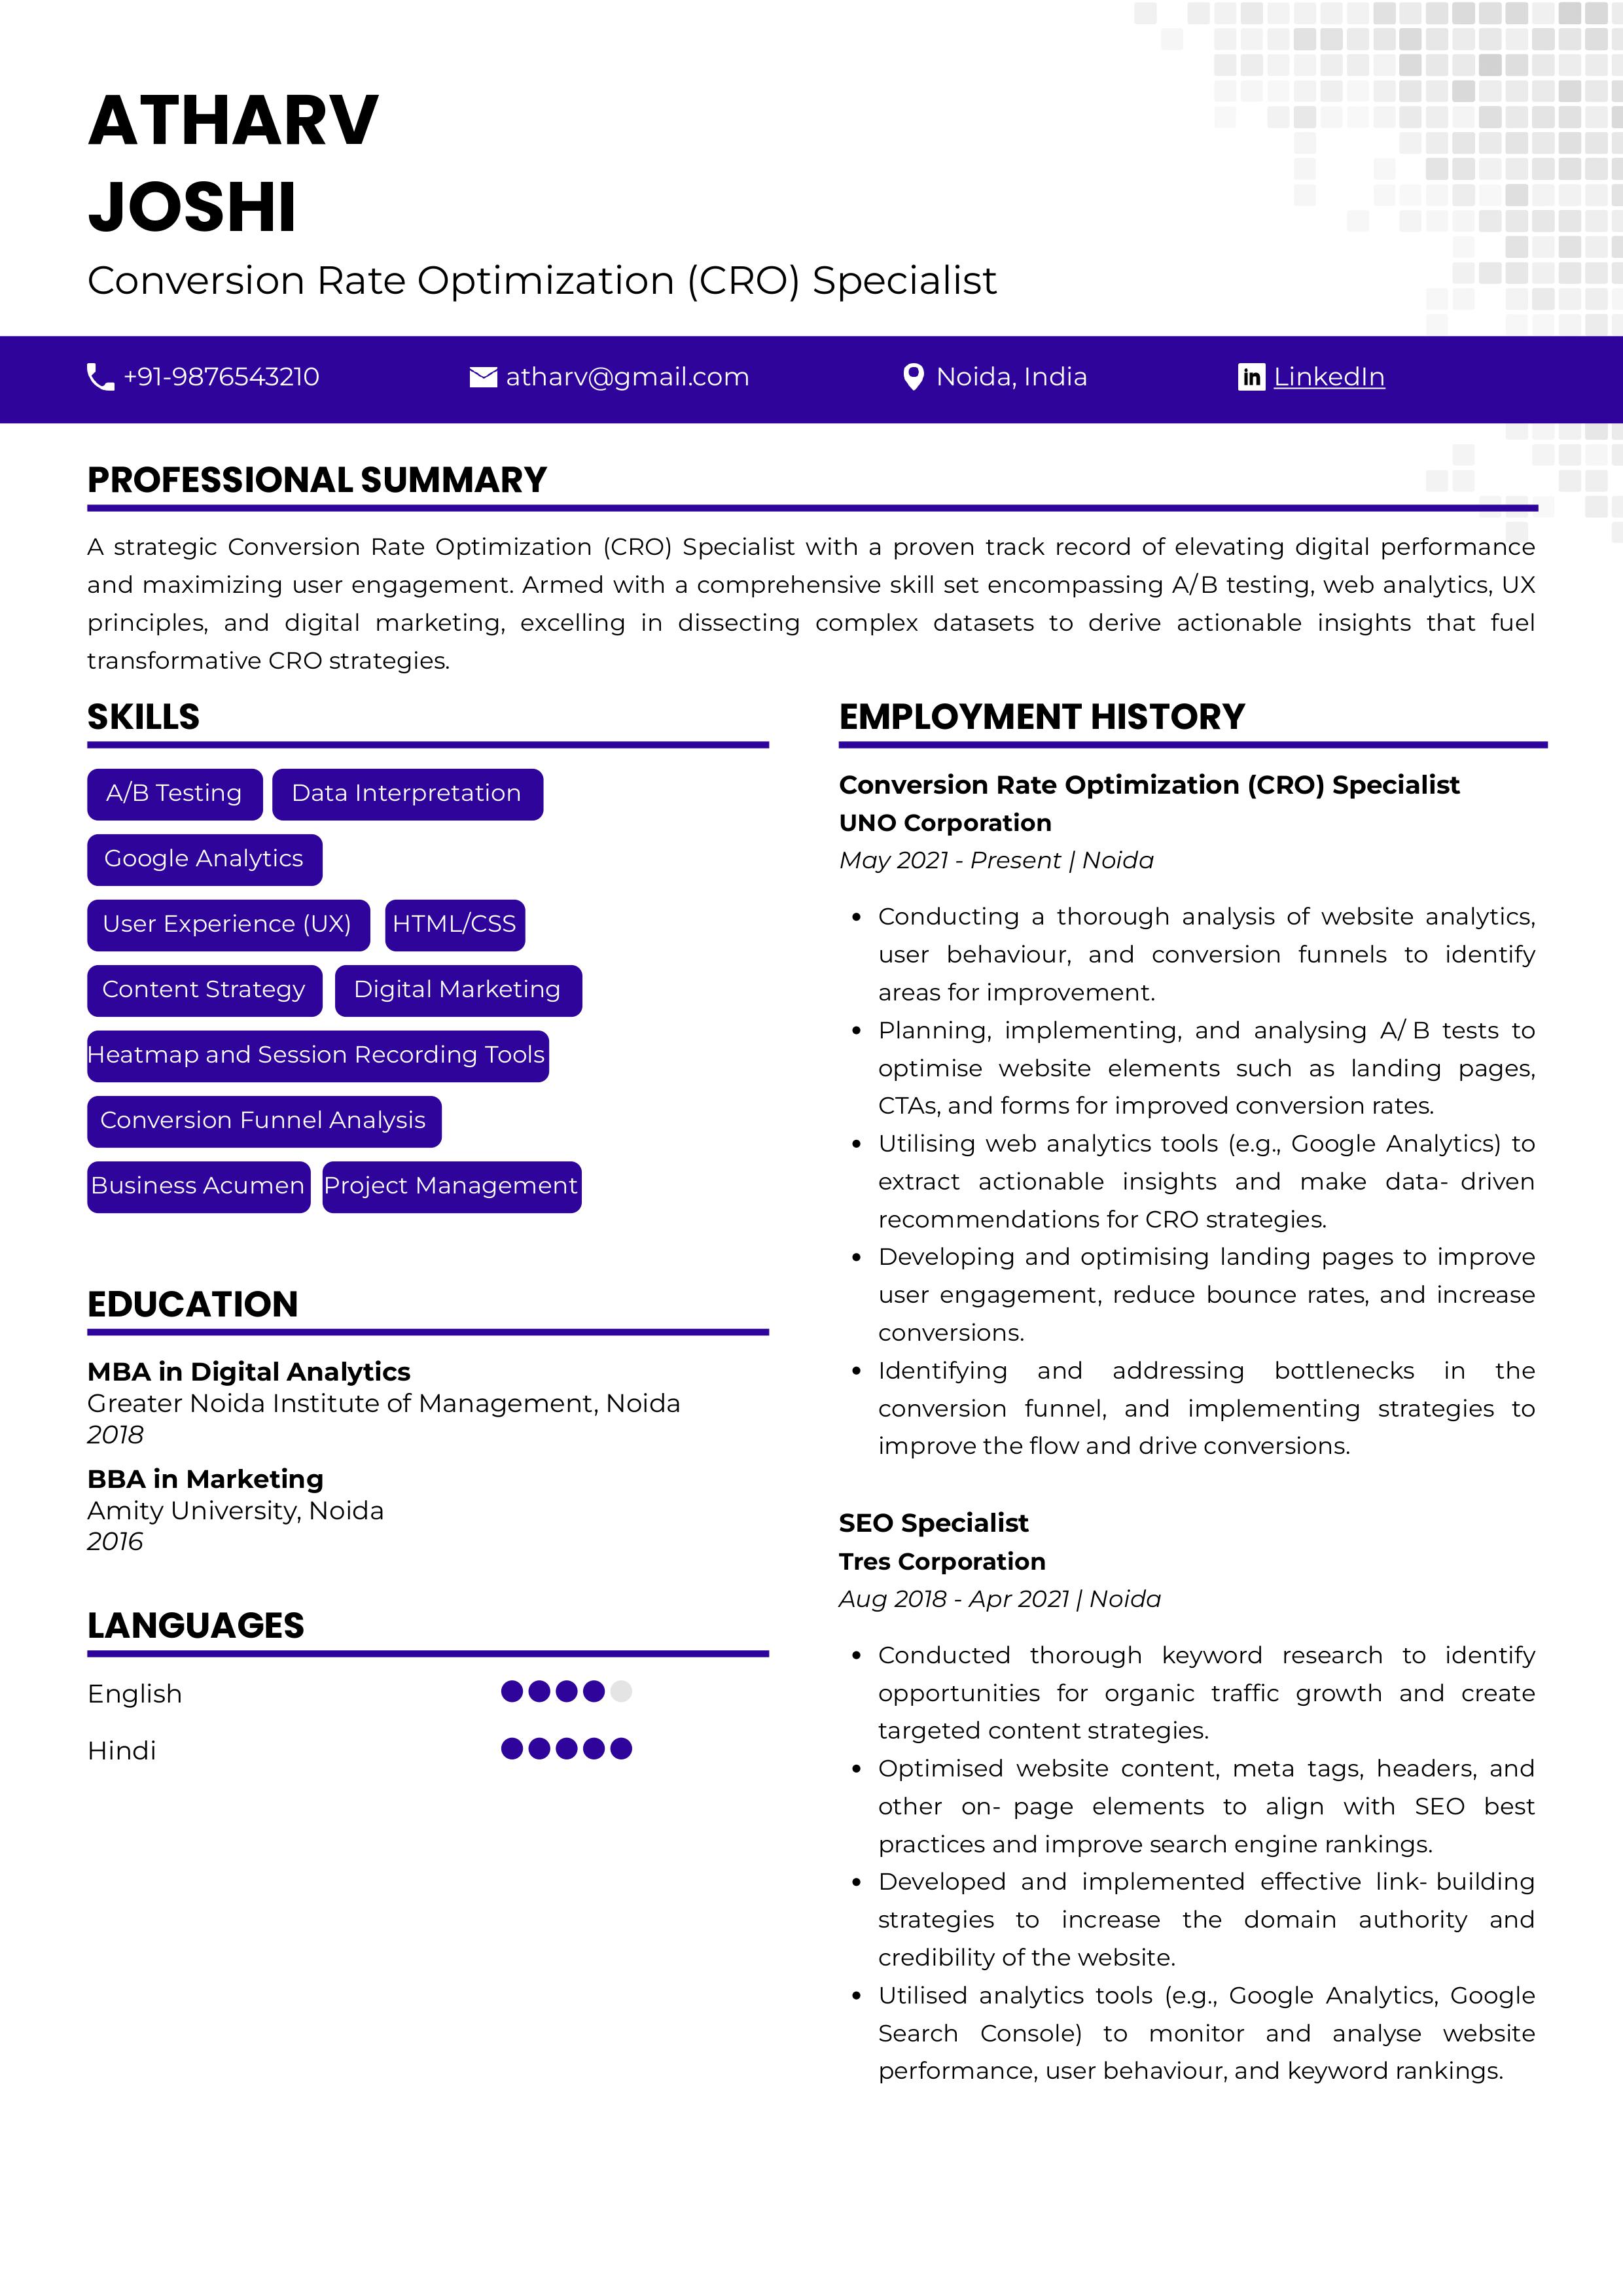 Sample Resume of Conversion Rate Optimization (CRO) Specialist | Free Resume Templates & Samples on Resumod.co